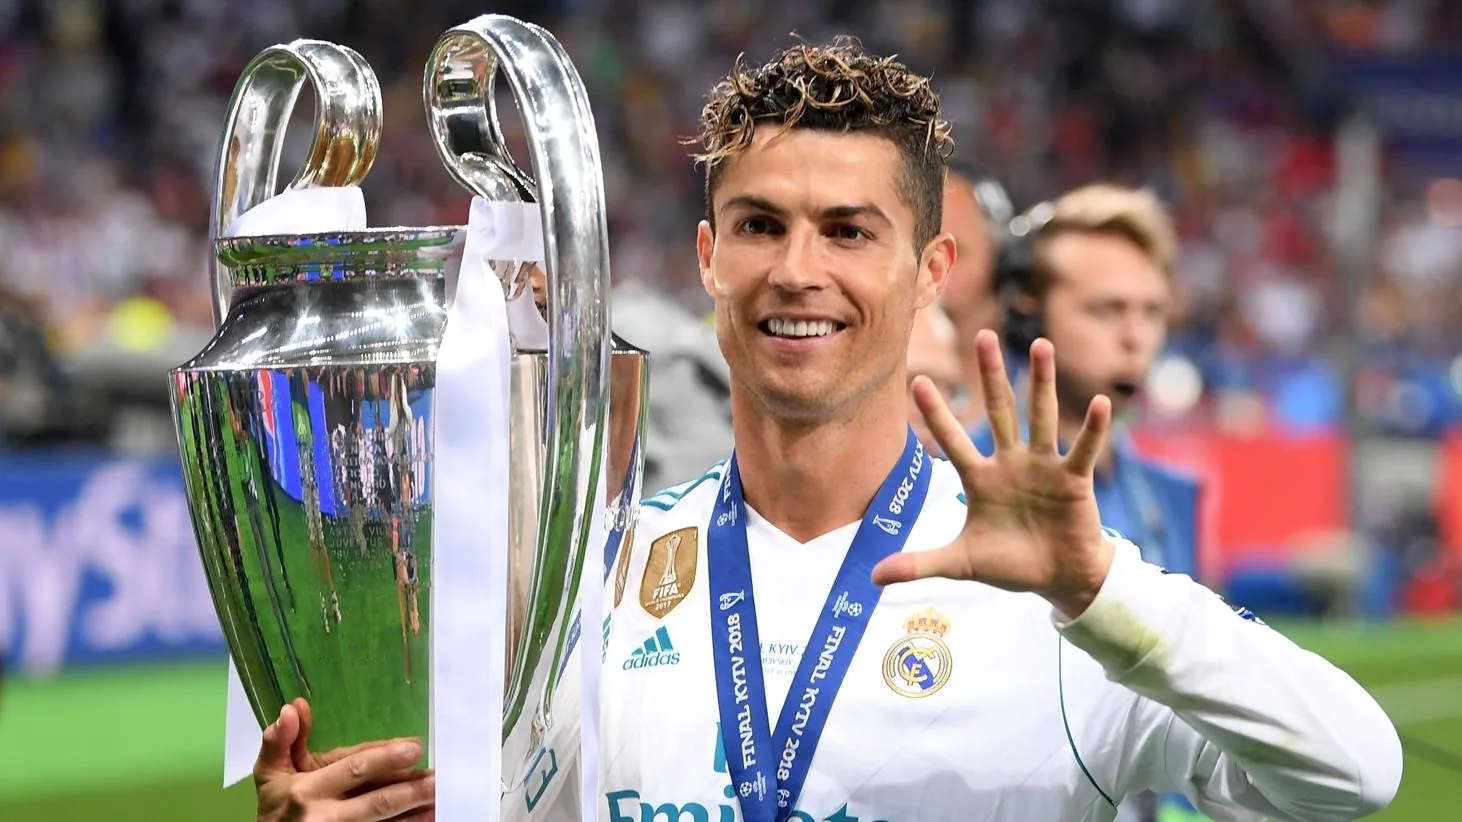 Cristiano Ronaldo: The King of Goals and Predictions in the Football World